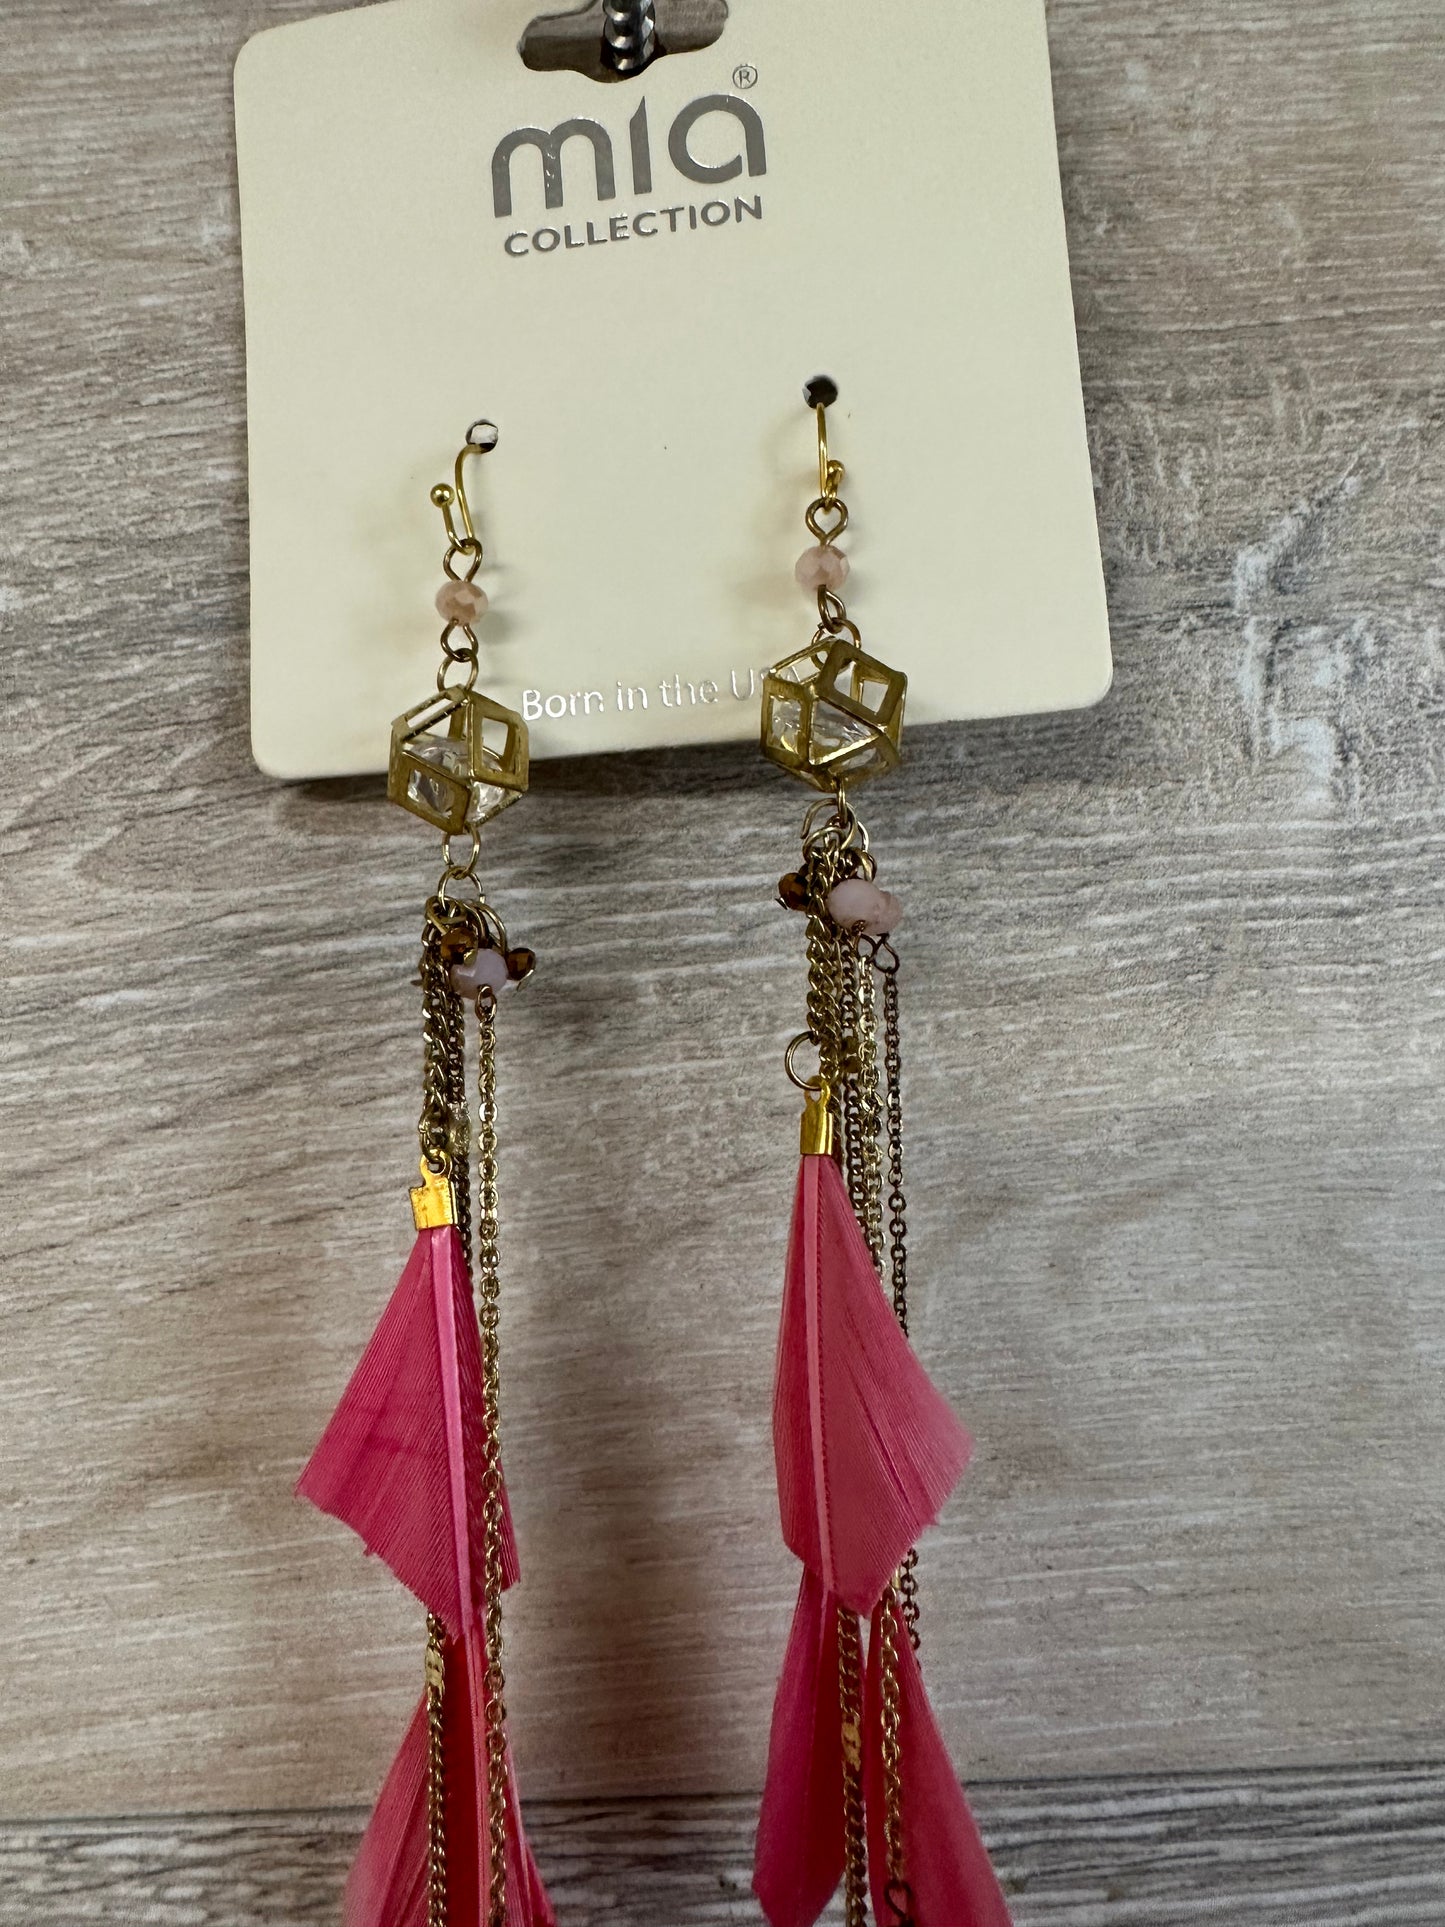 Mia Collection Gold Drop/Dangle Earrings with Pink Feathers